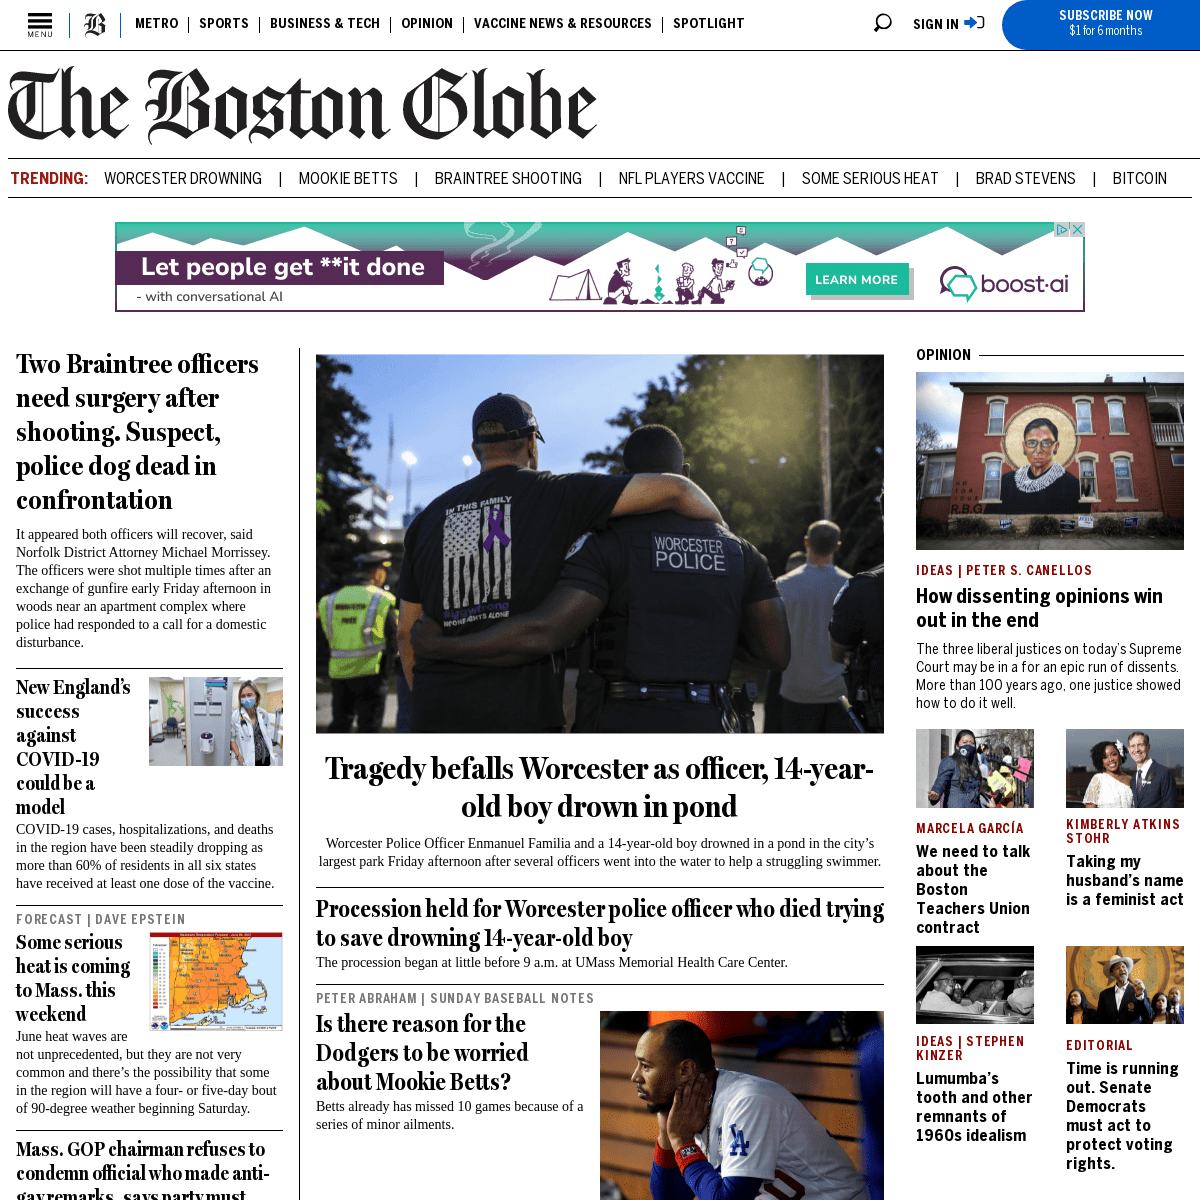 A complete backup of https://bostonglobe.com